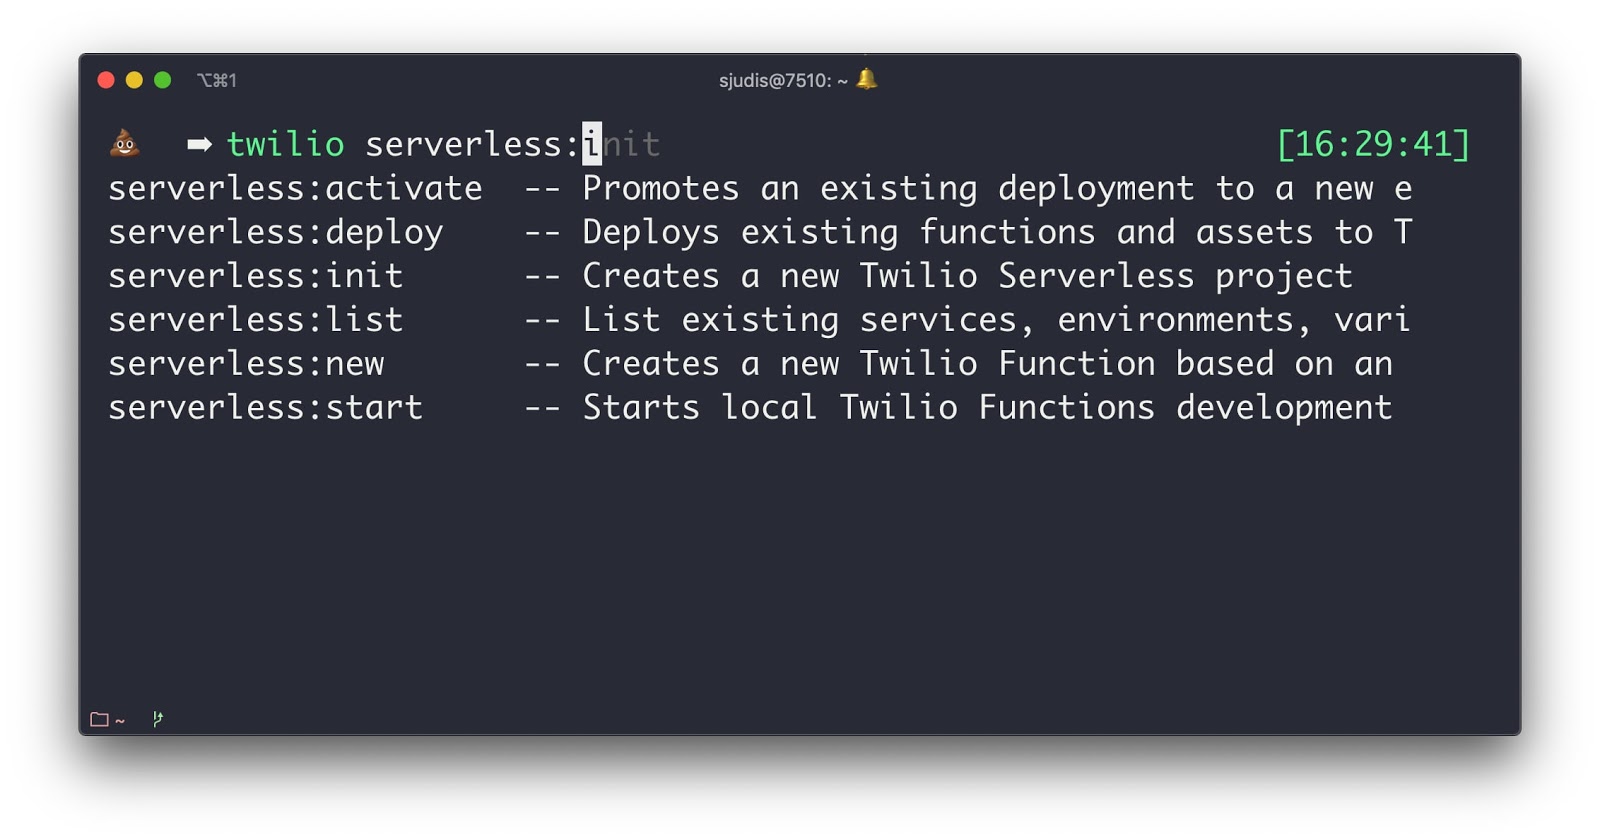 `twilio serverless` commands shown with completion: activate, deploy, init, list, new and start